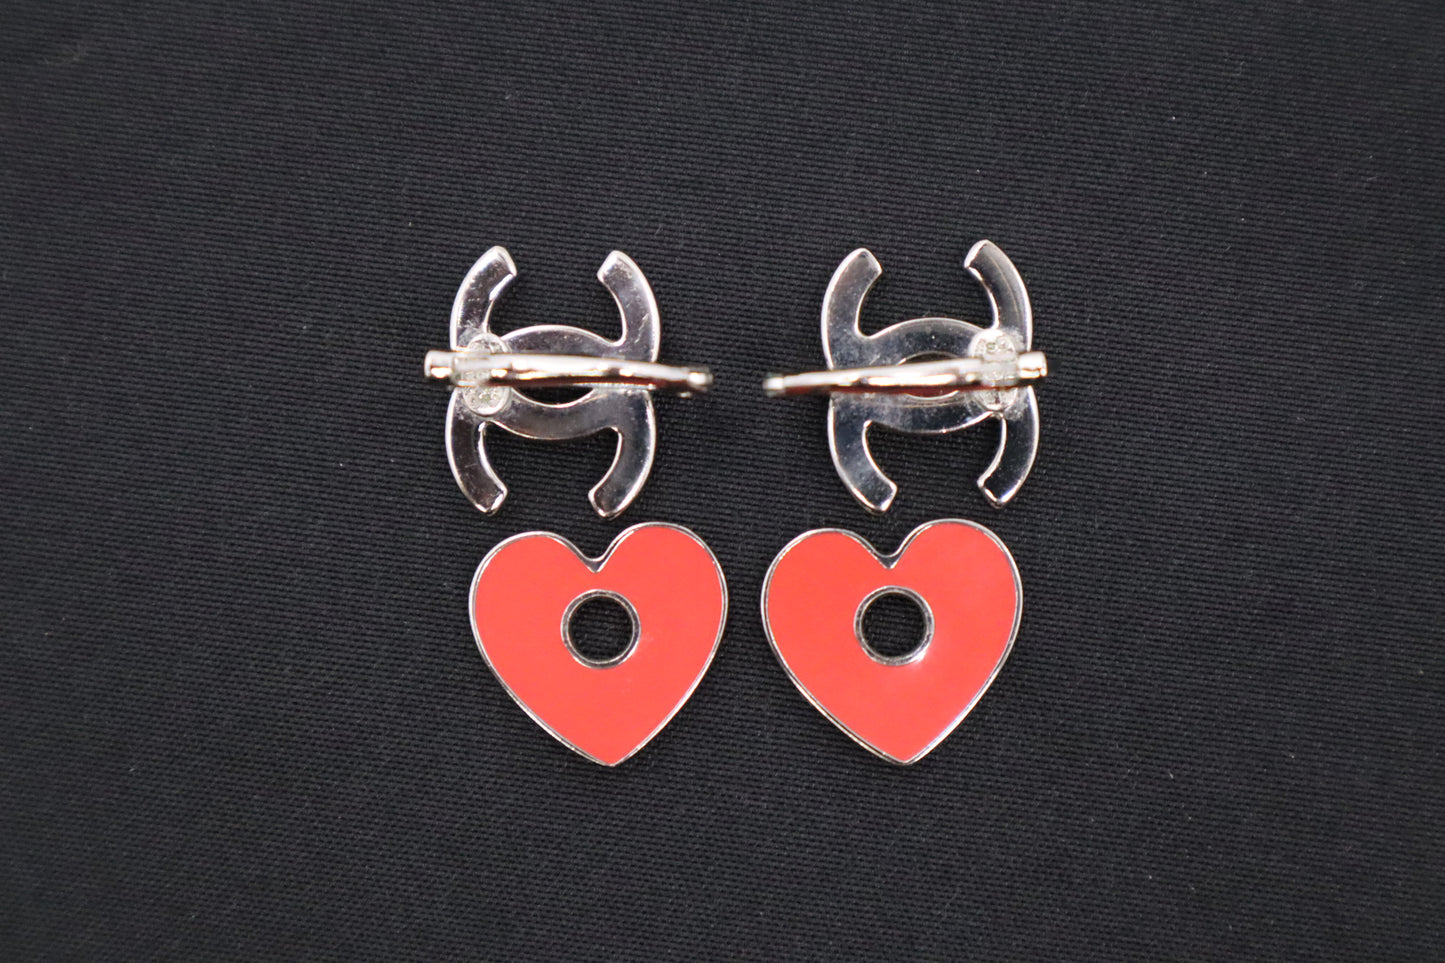 Chanel Heart Earrings in Pink and Red